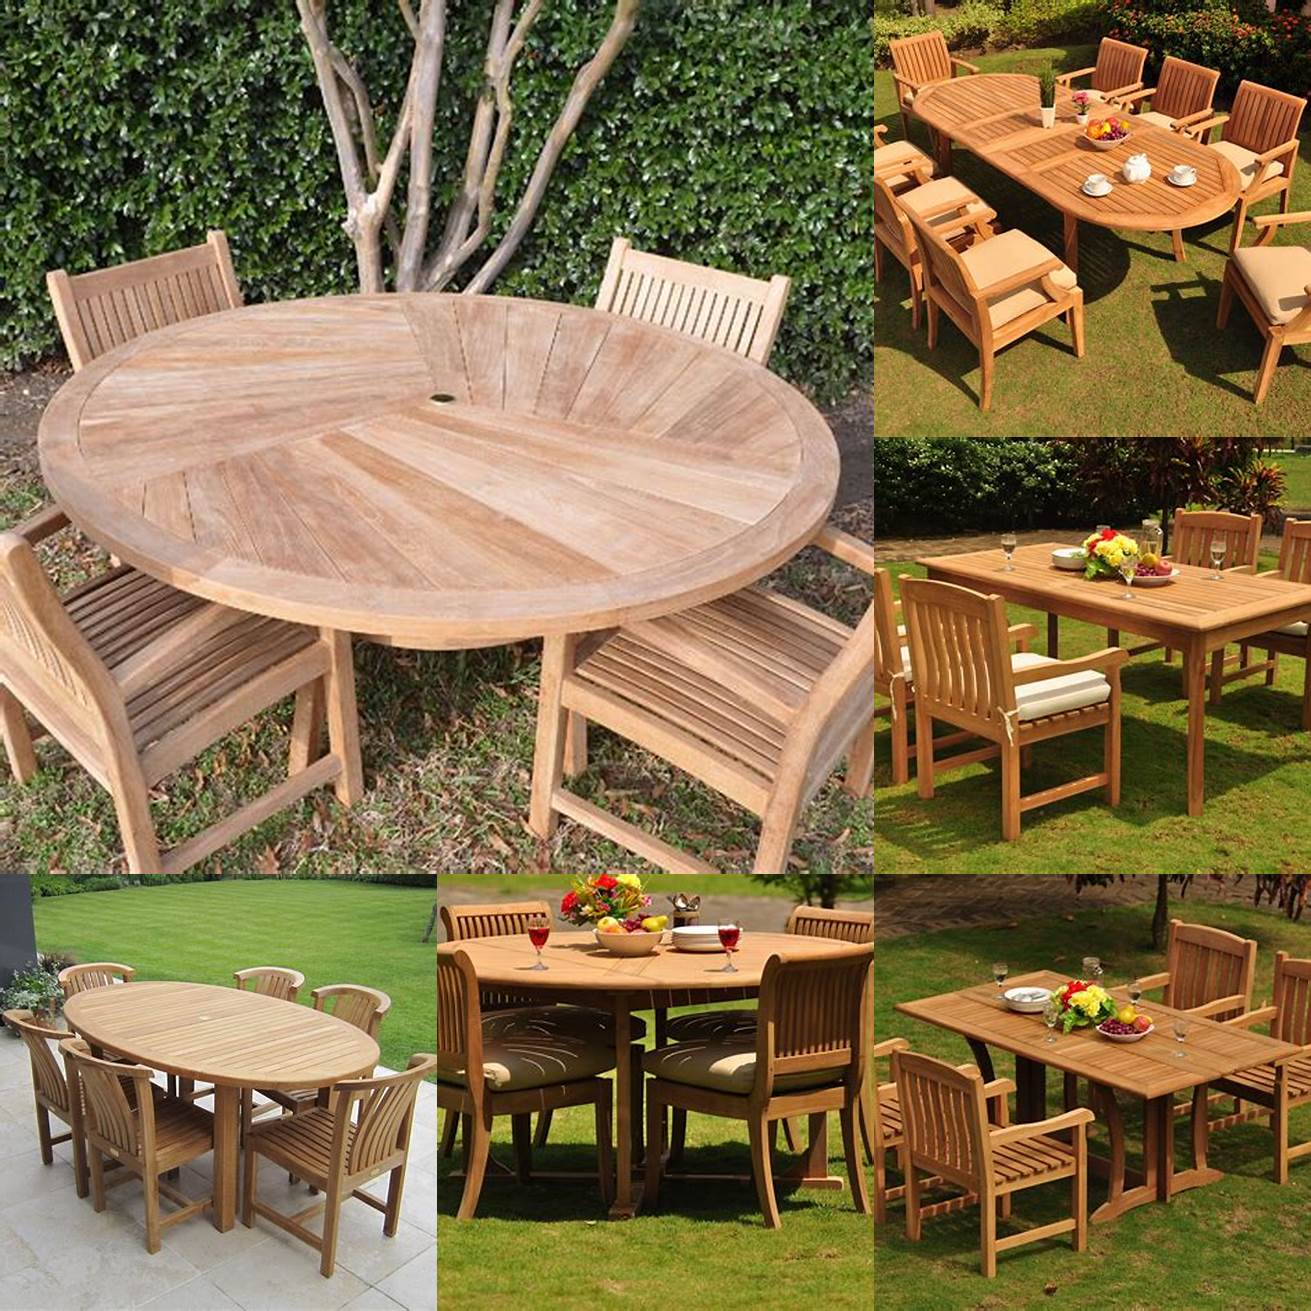 Teak Table with Outdoor Setting